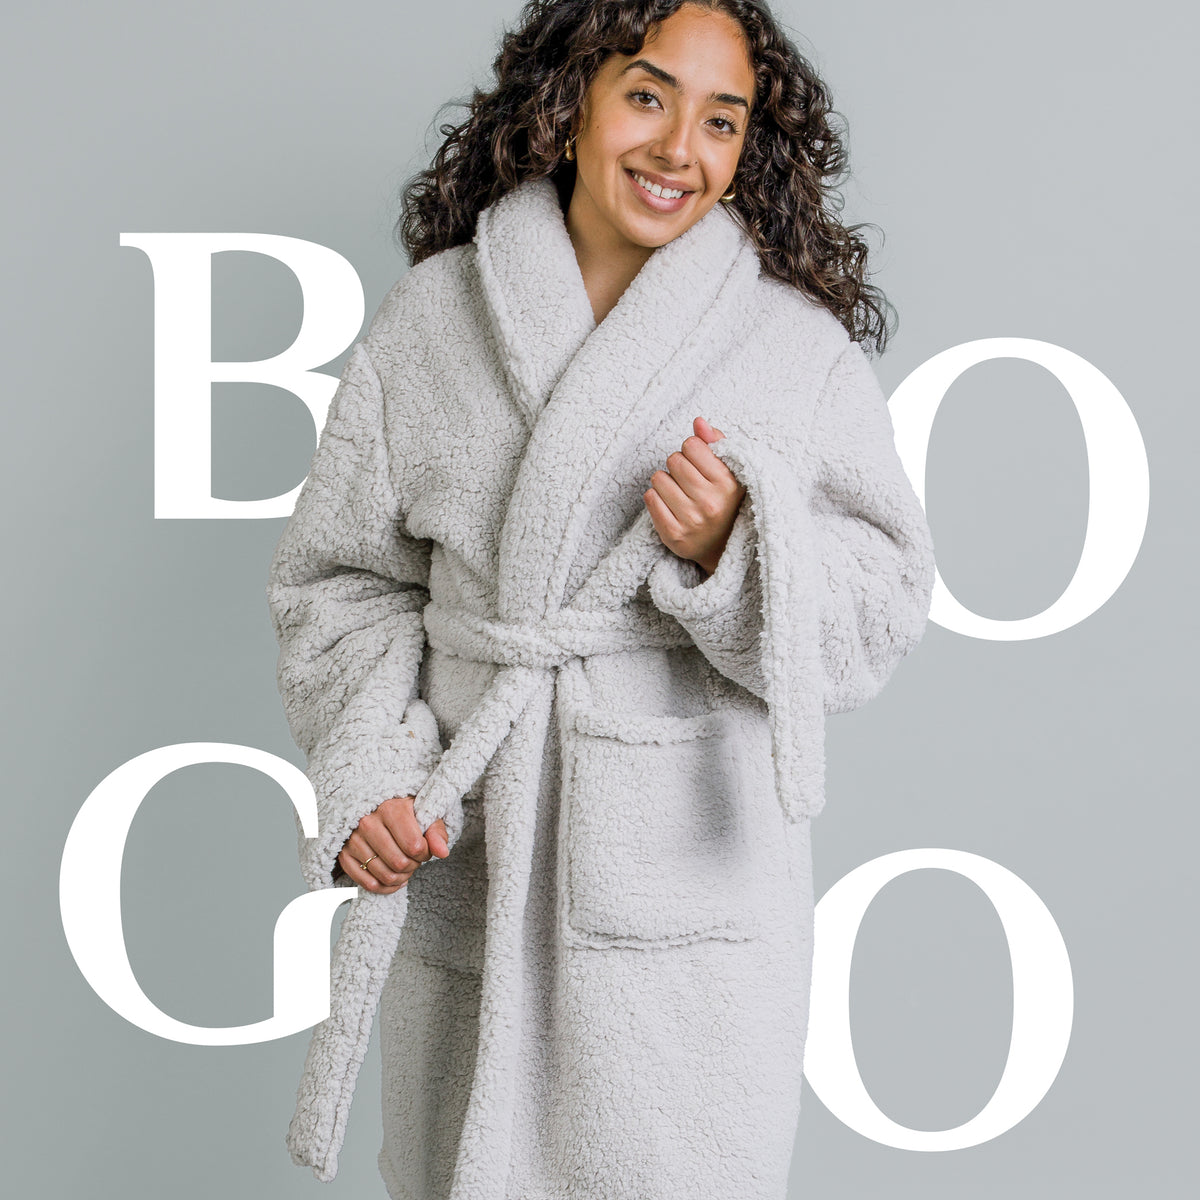 Image of a woman smiling, wearing a Sunday Morning Robe with BOGO spelled in white letters behind her